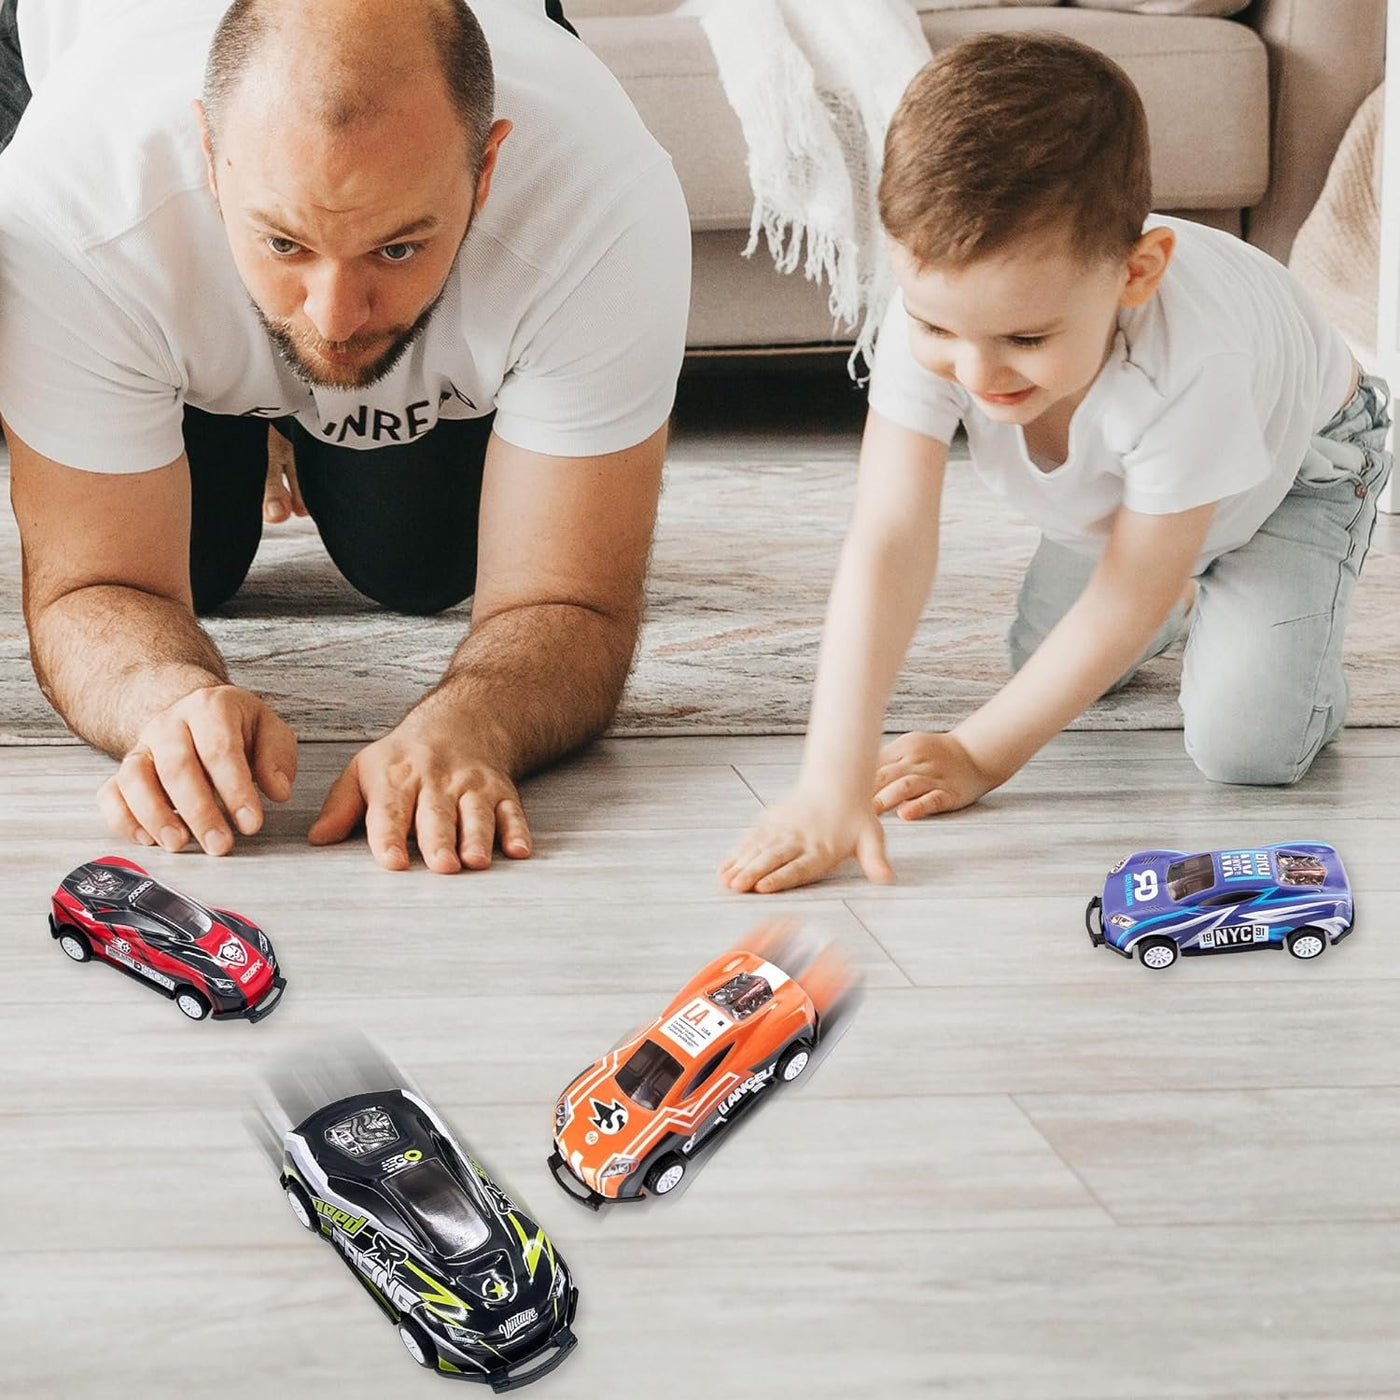 Pullback Flip Stunt Cars for Boys - Set of 12 - Pullback Diecast Race Cars for Kids in 8 Cool Designs - Retro Toy Cars for Boys and Girls - Model Stunt Cars for Hours of Racing Fun